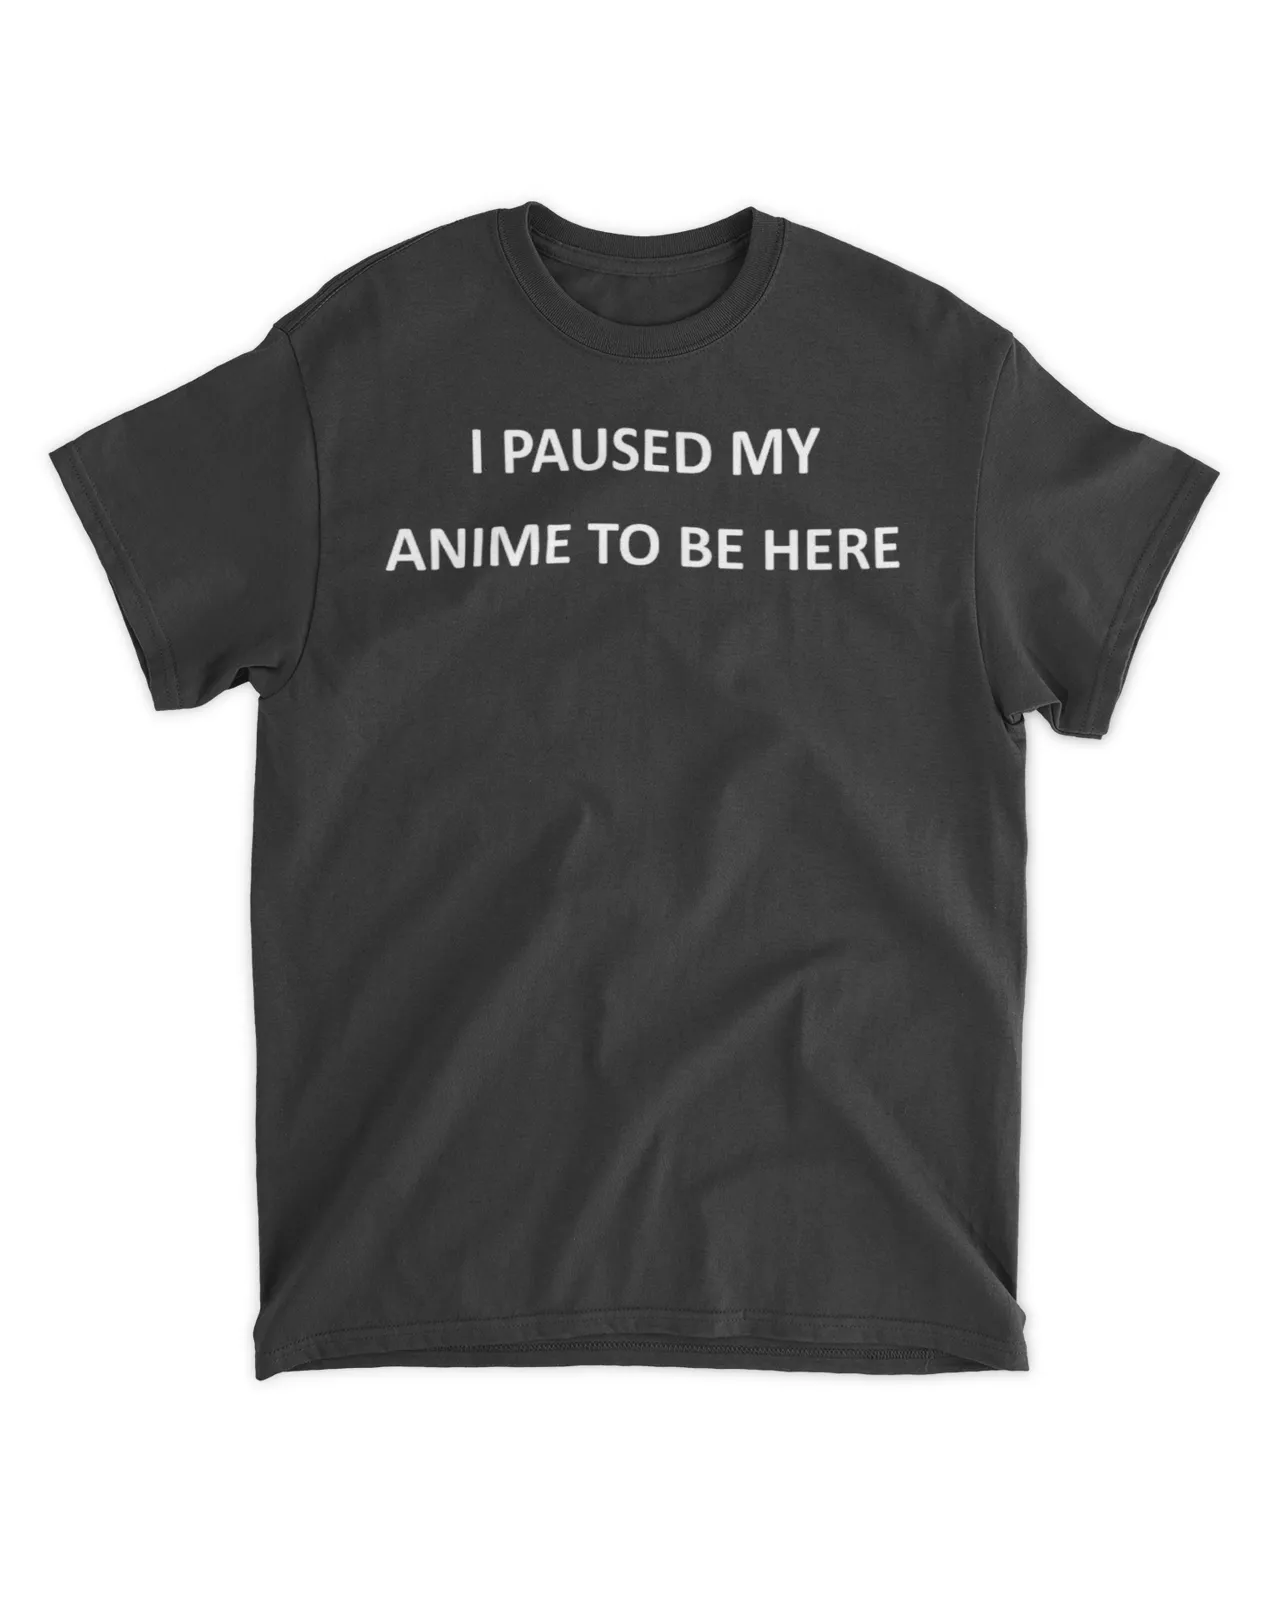  I paused my anime to be here shirt